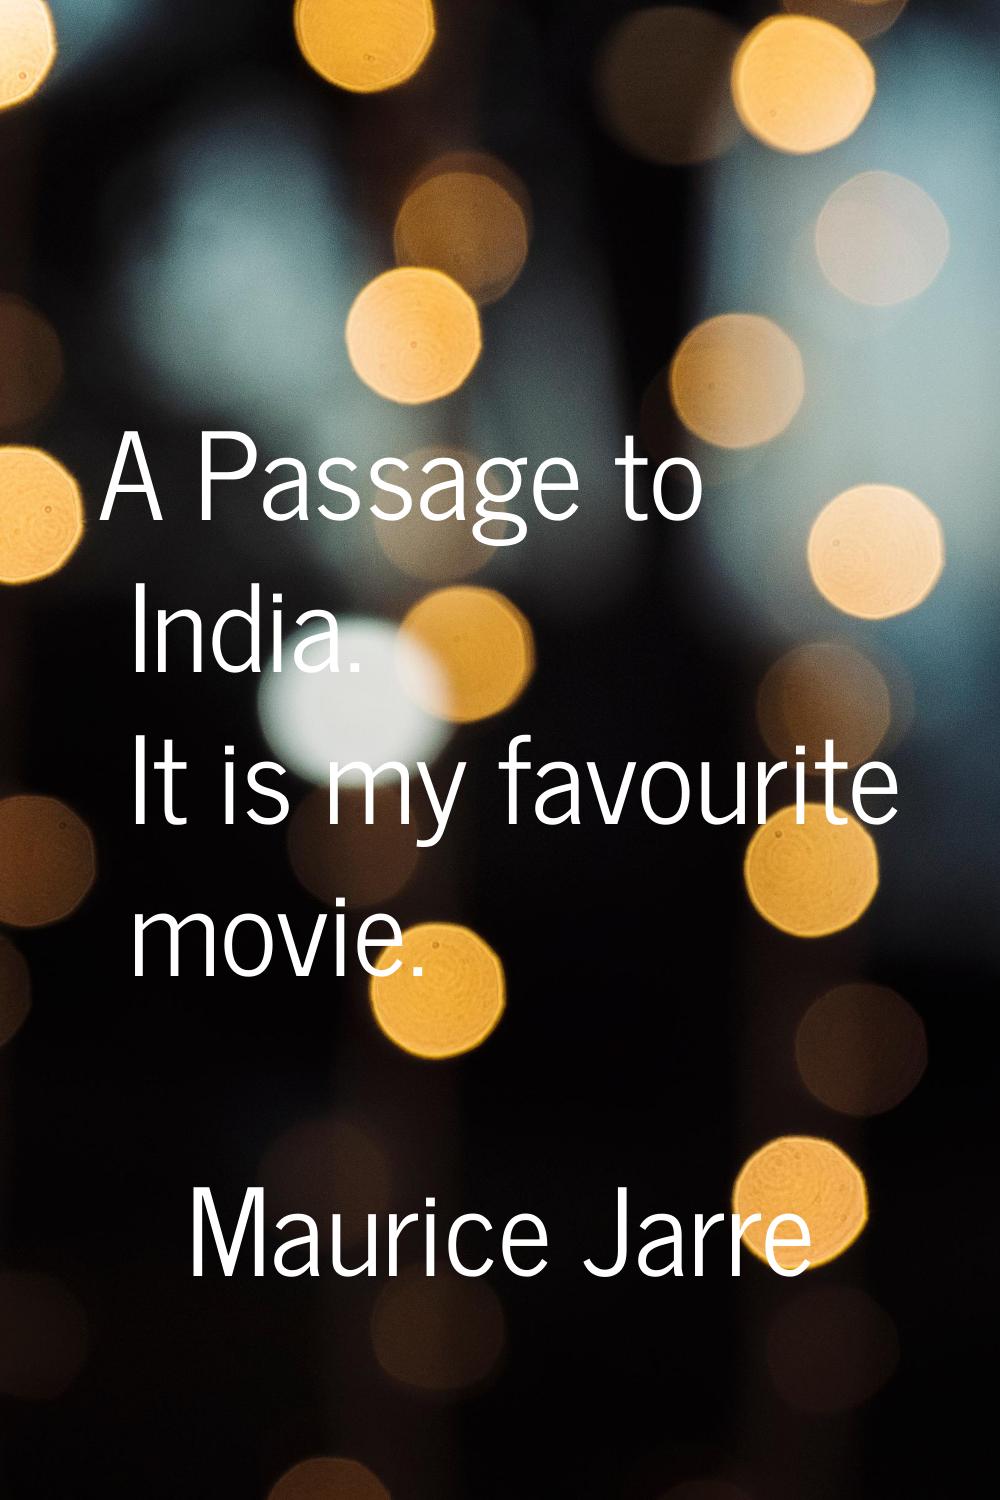 A Passage to India. It is my favourite movie.